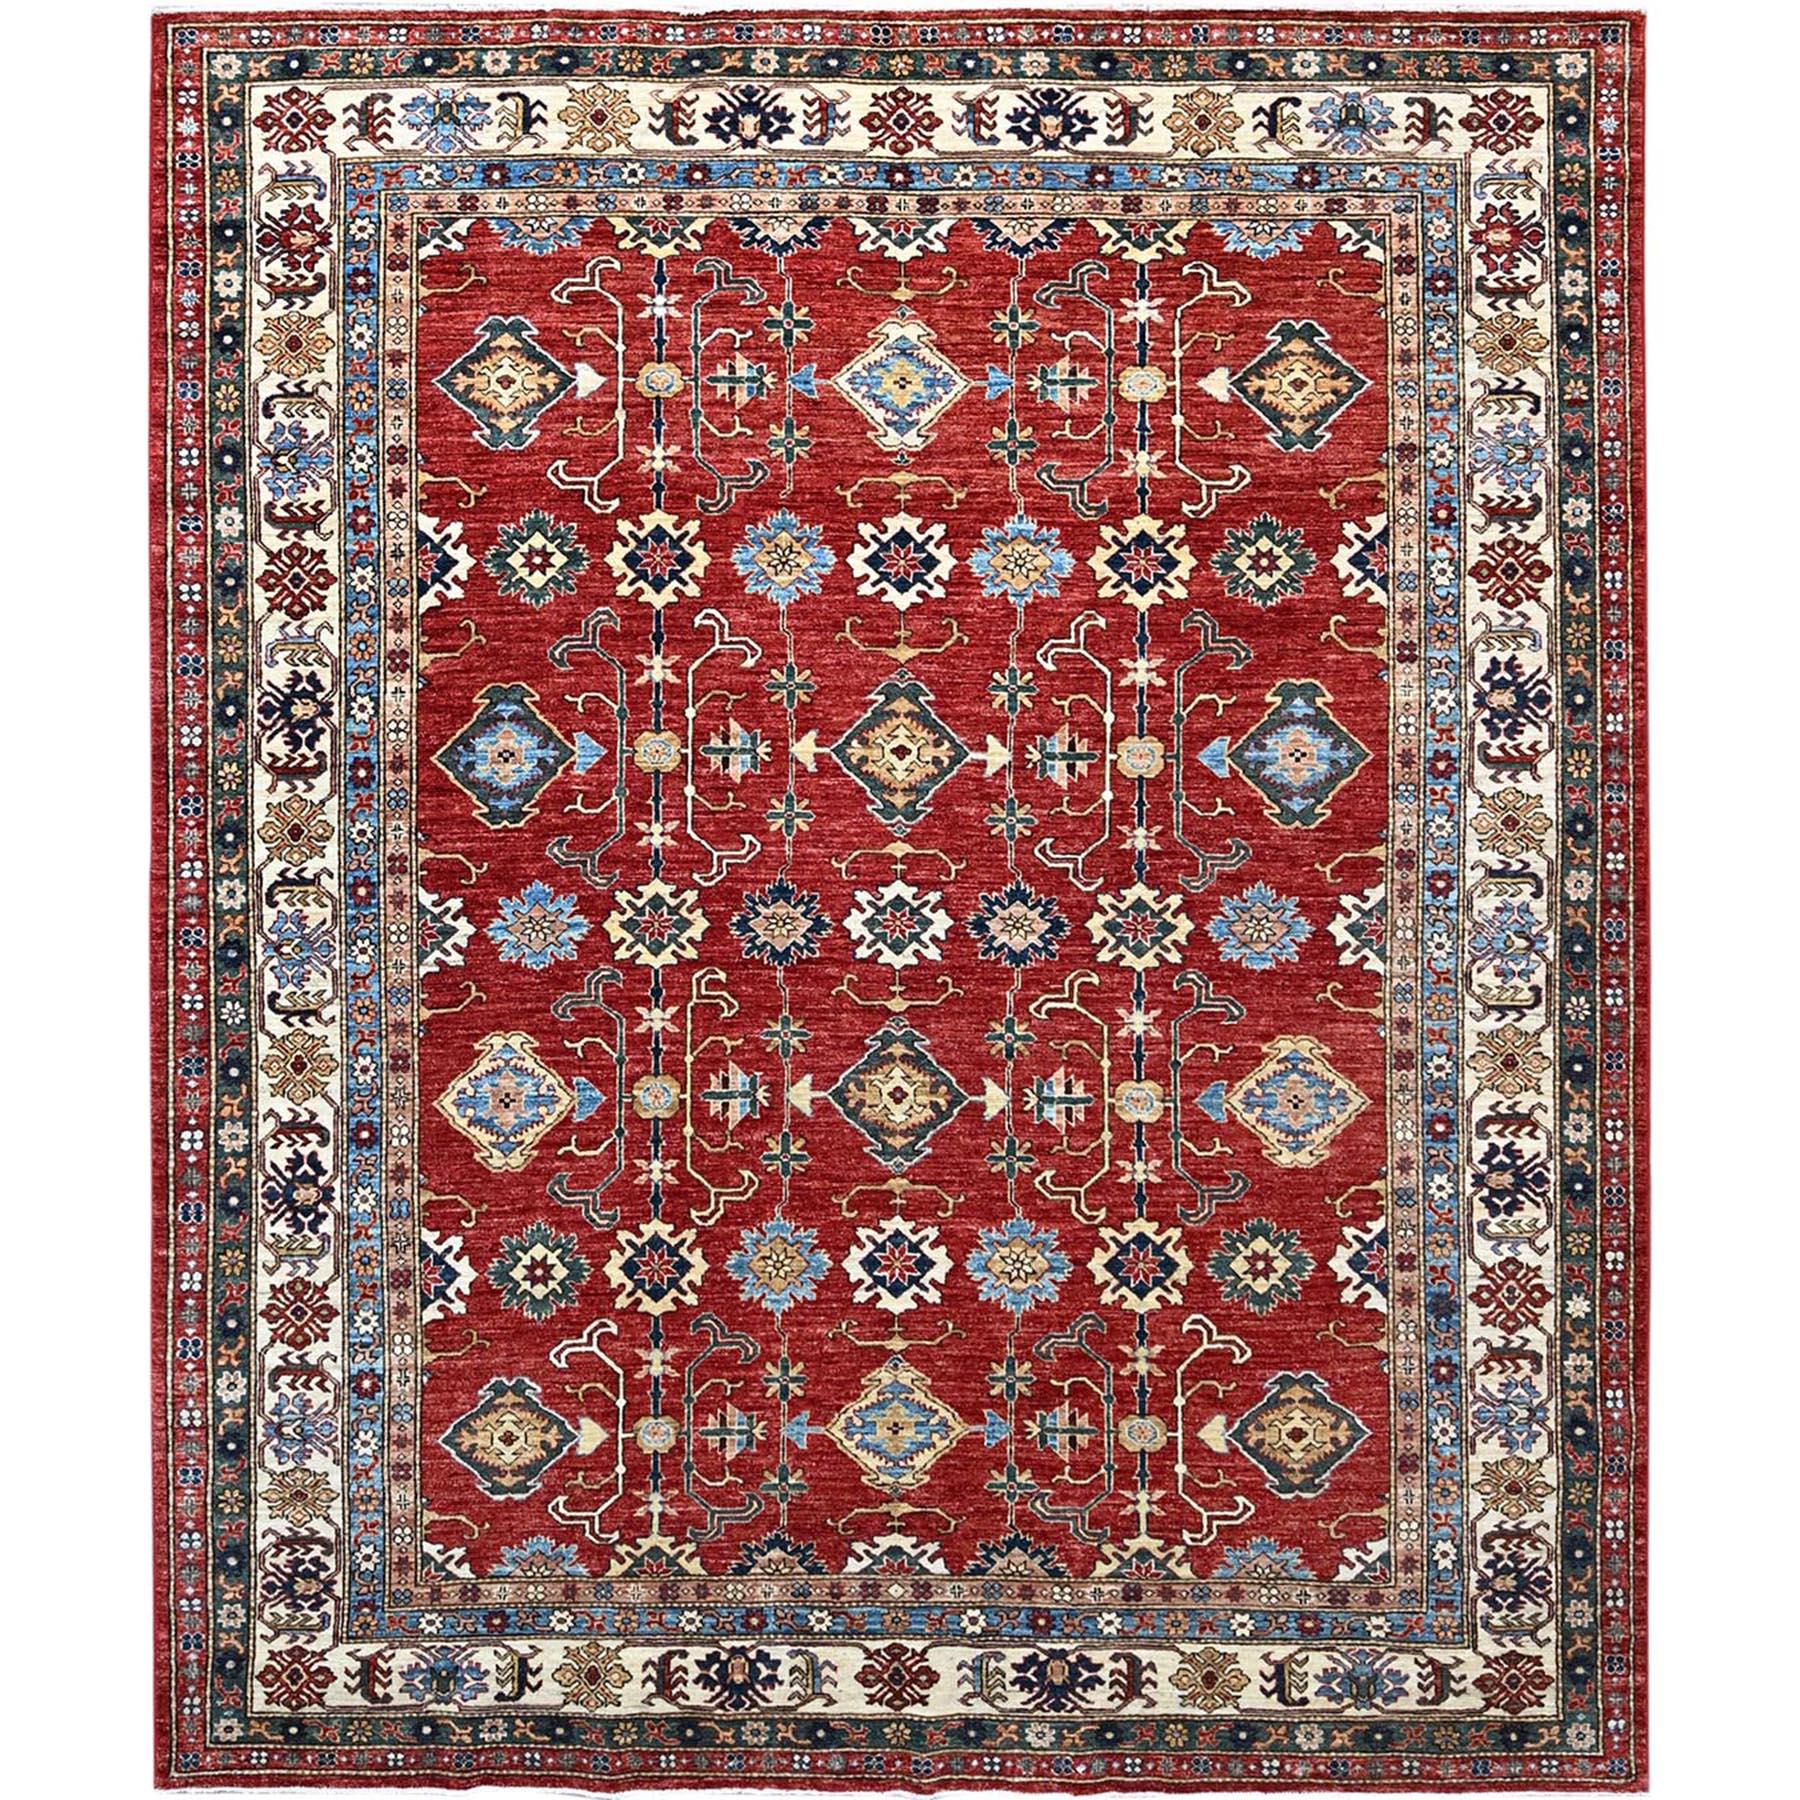 Exotic Red, Natural Dyes Afghan Super Kazak with Geometric Medallions Design, Hand Knotted 100% Wool, Denser Weave, Oriental Rug